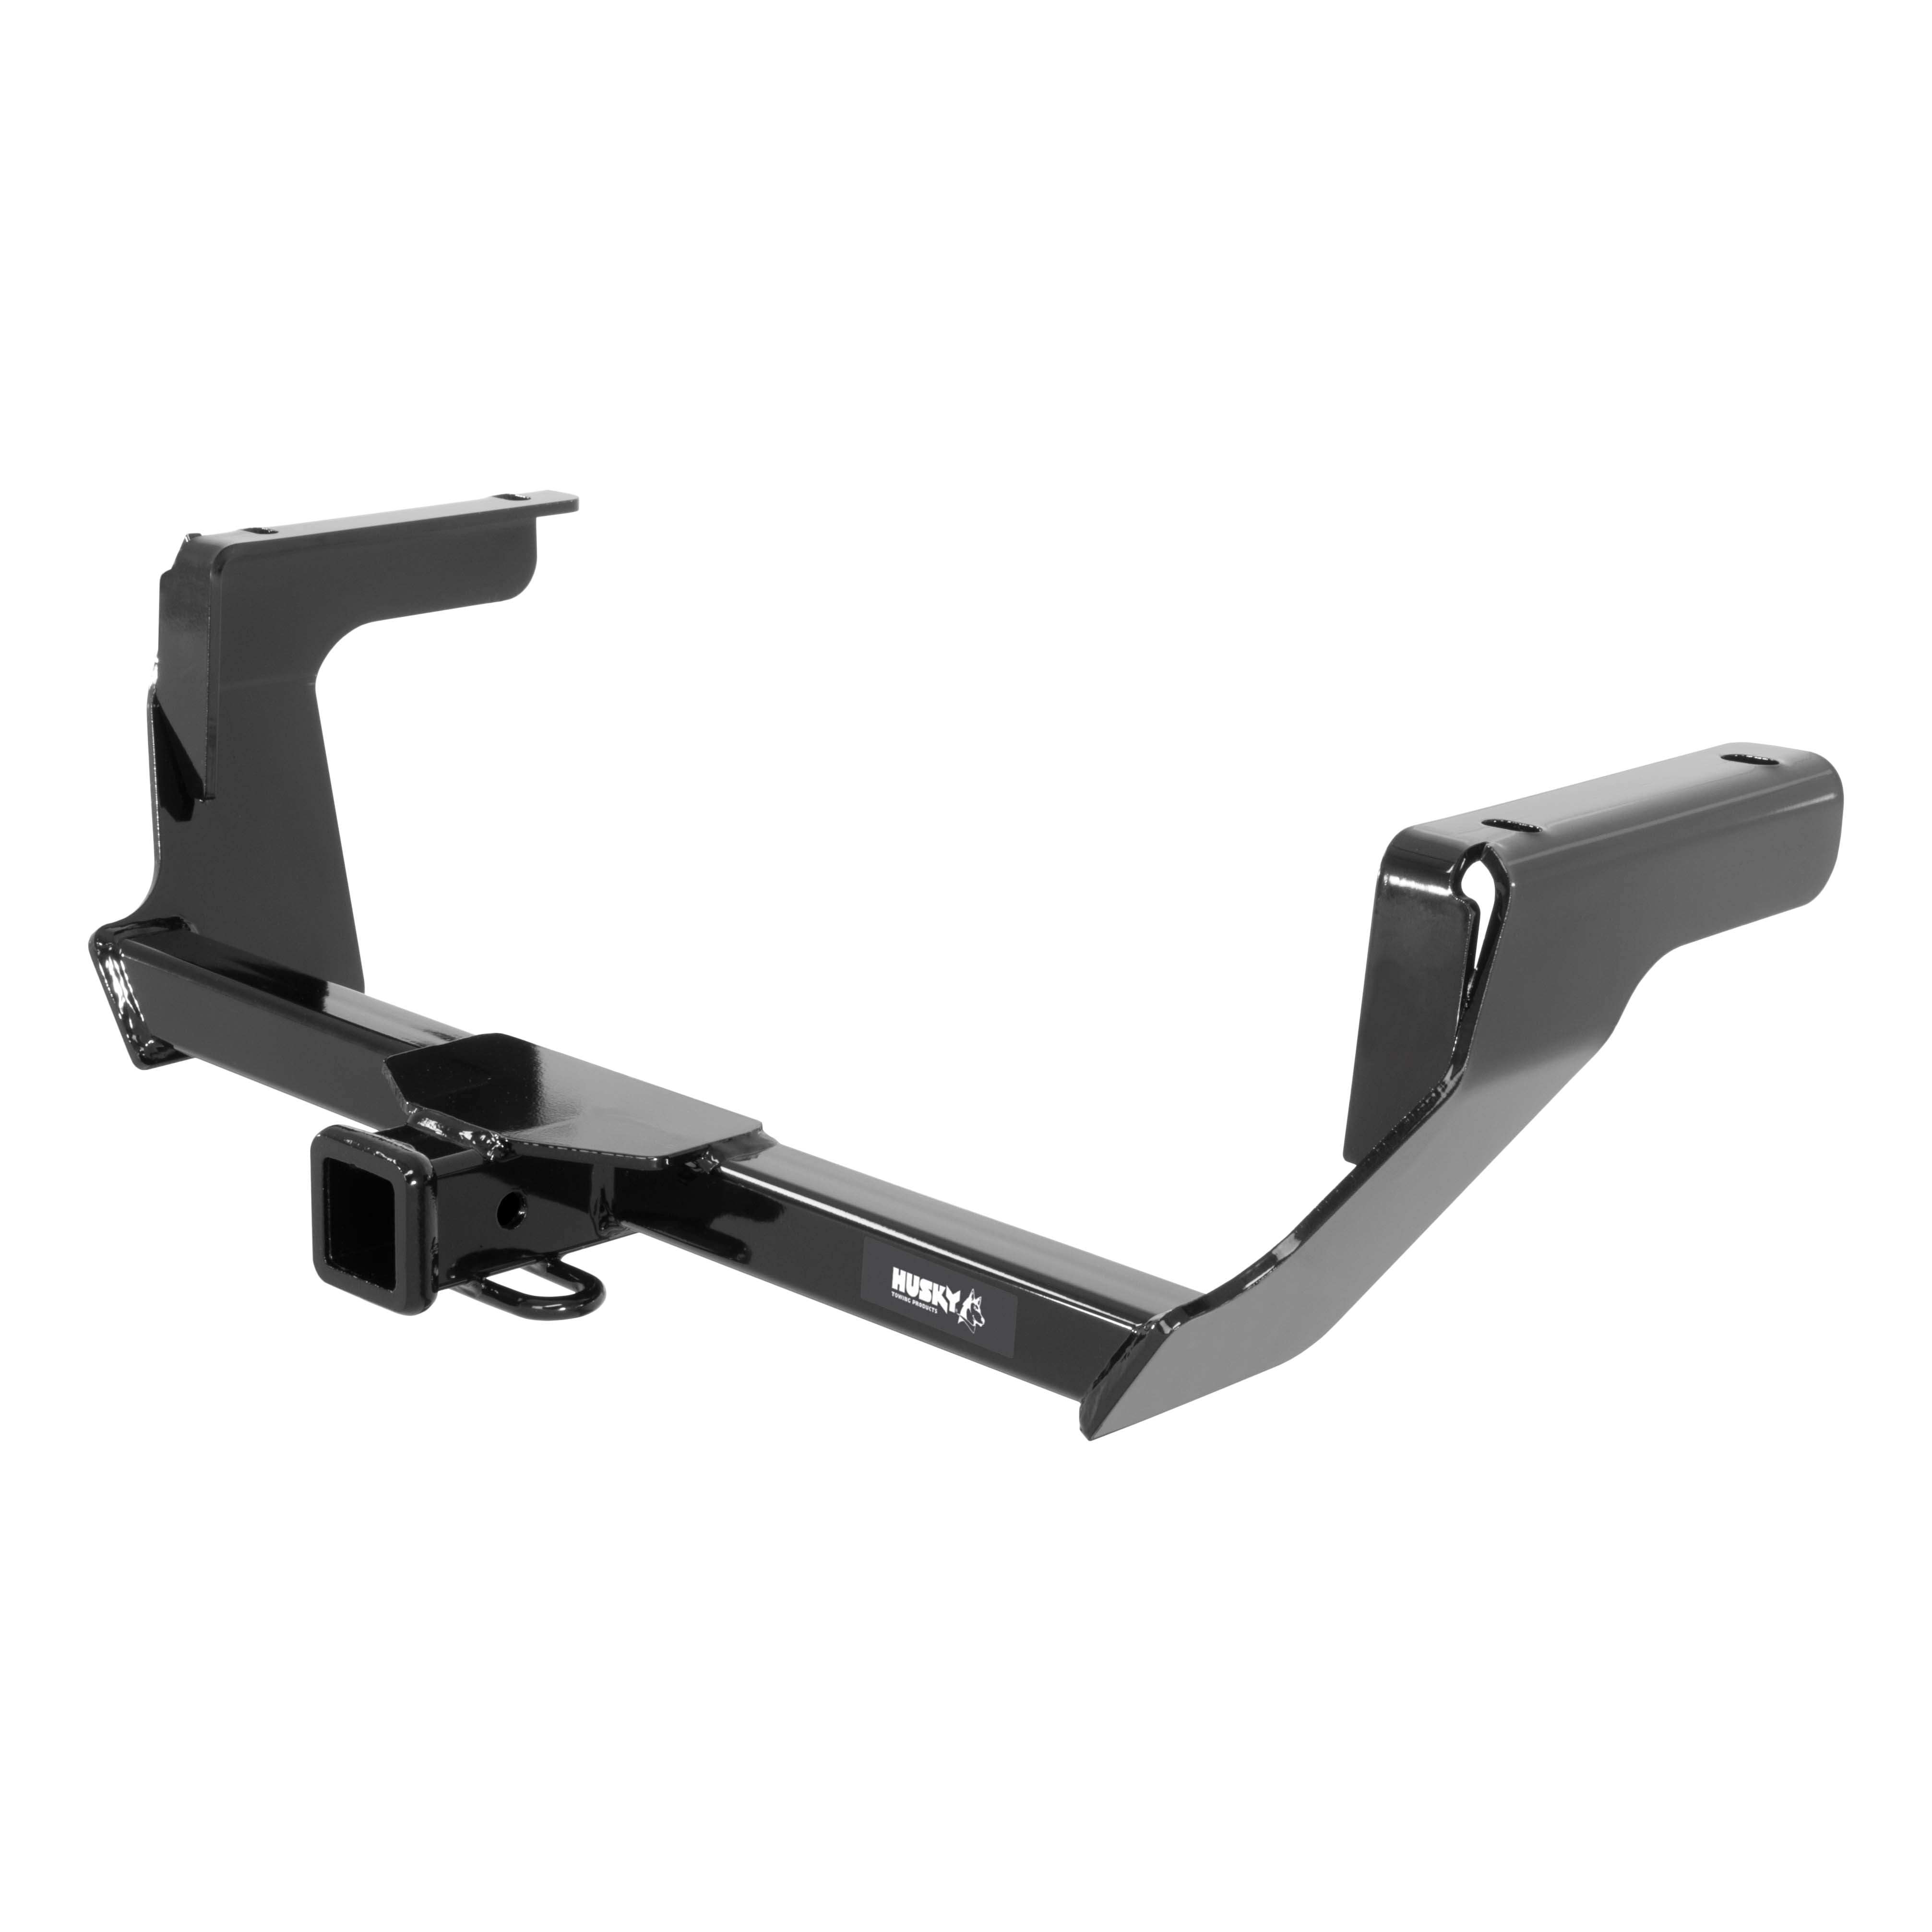 APS Assembly Class 3 Trailer Hitch 2 Inches Receiver Tube Compatible with 2014-2019 Subaru Outback